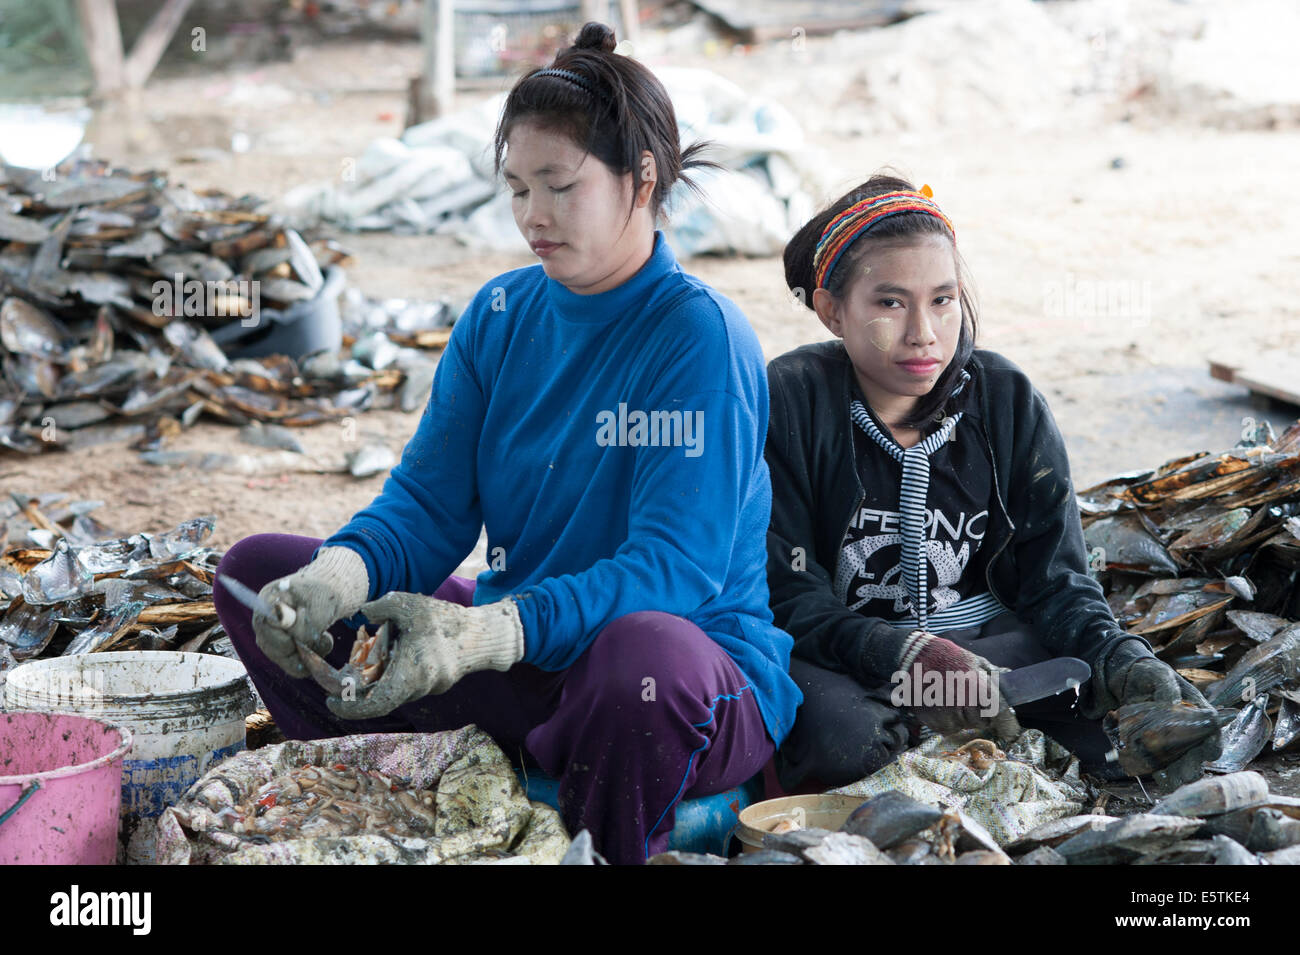 Young Burmese Myanmar child labour workers toiling in the Thai fishing industry near Hua Hin Thailand. Stock Photo